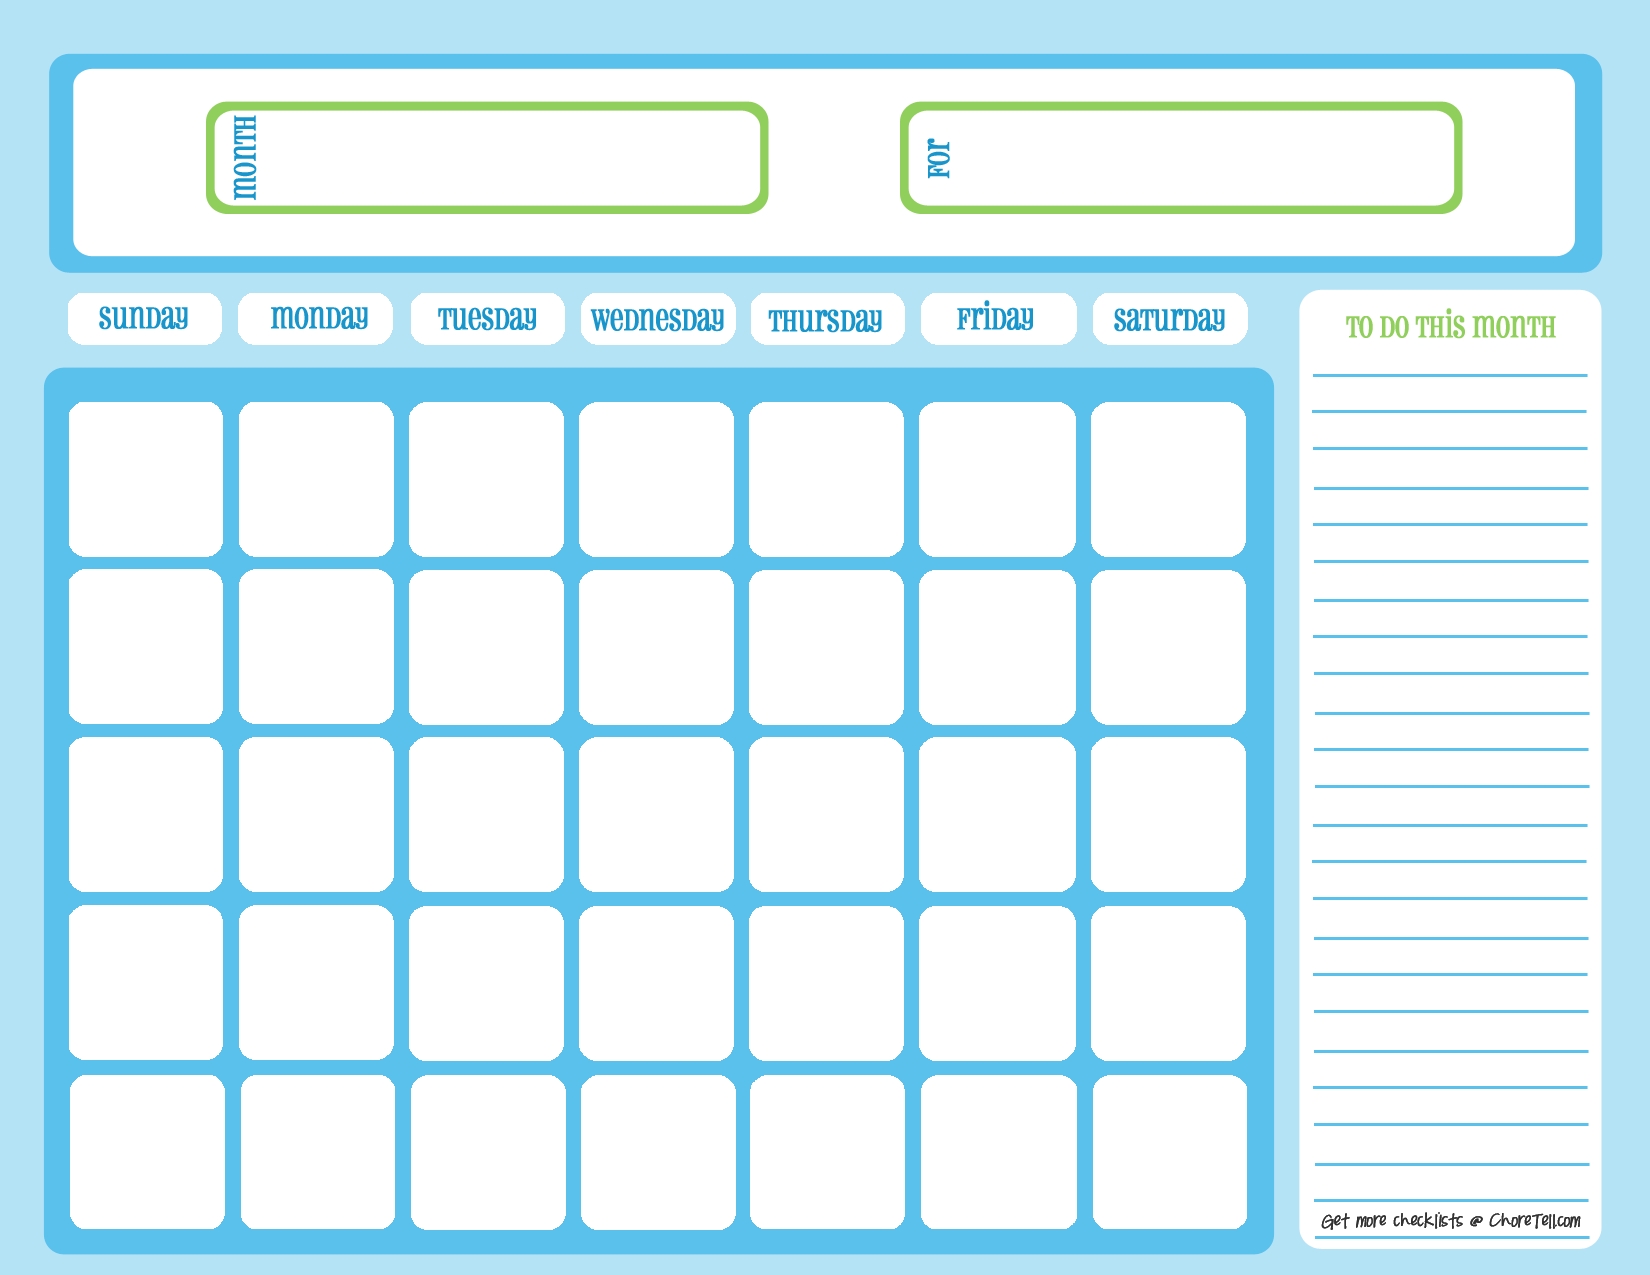 blank chore calendar, one month, full page, blue on light